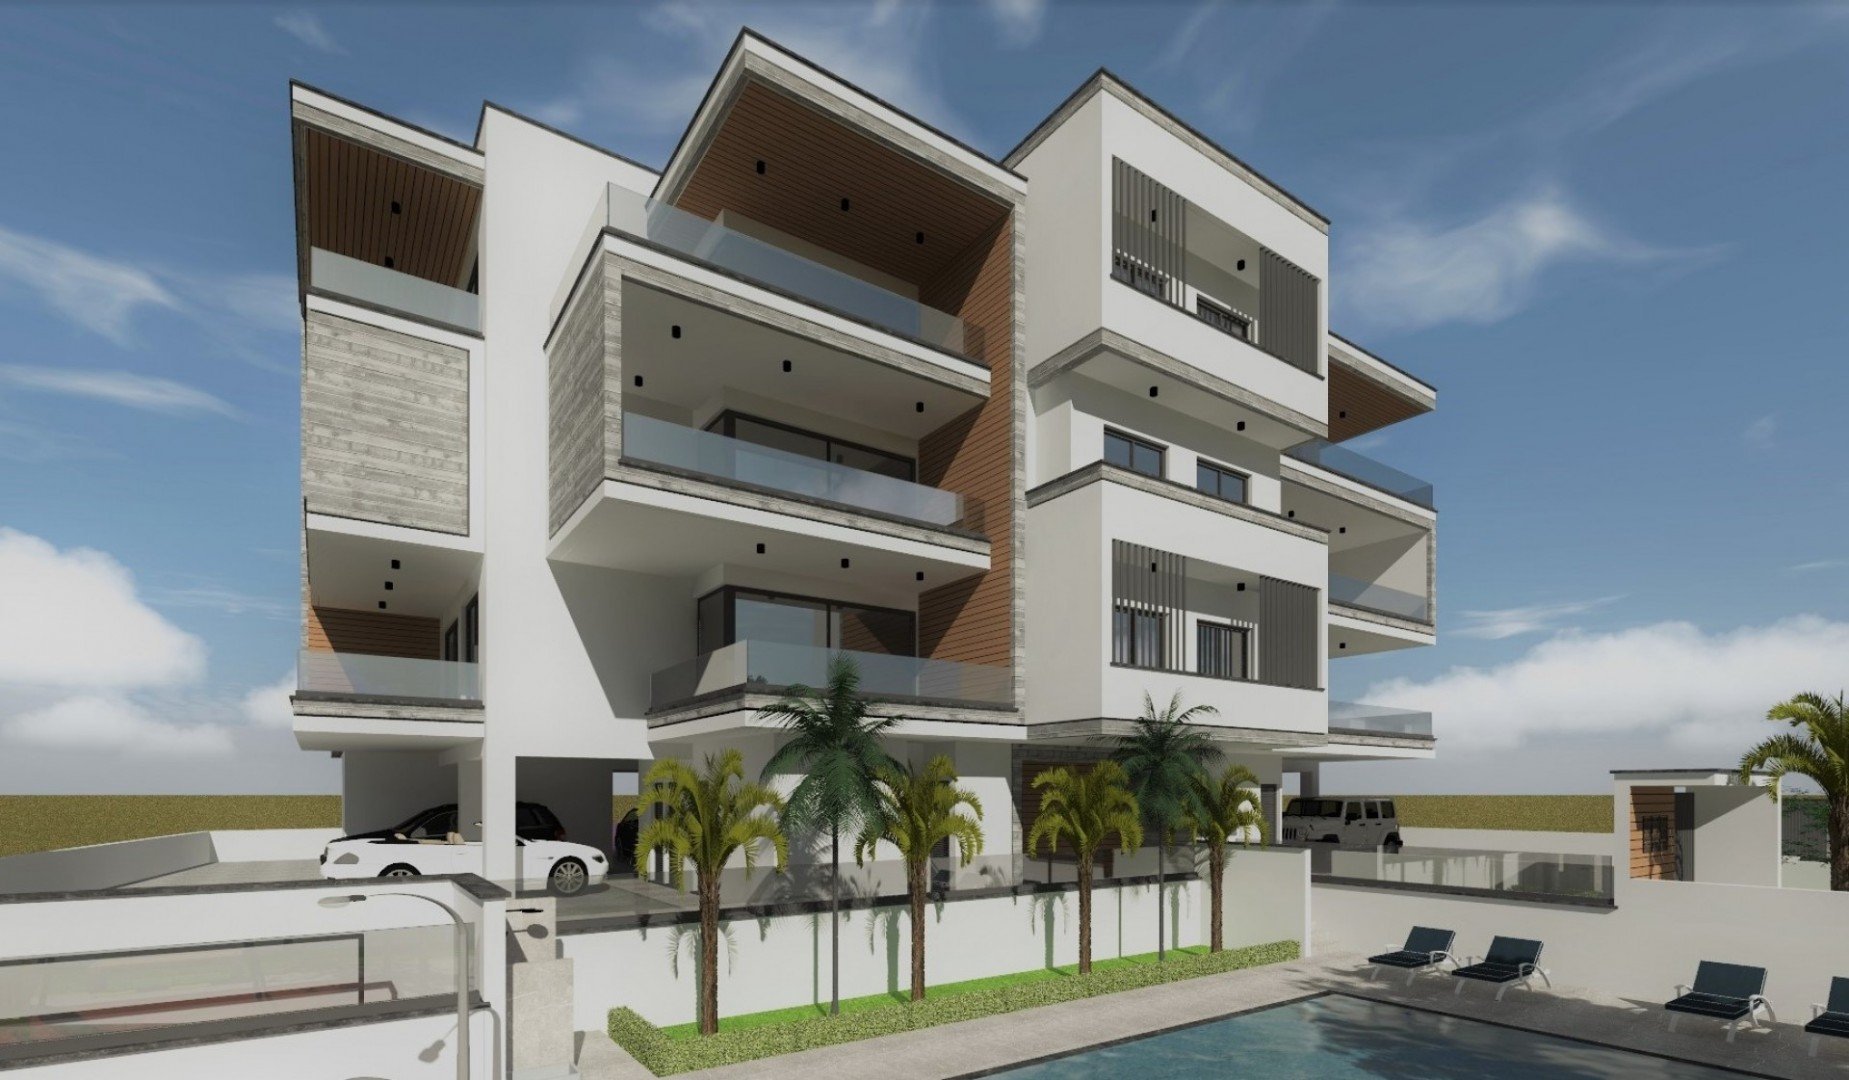 2 Bedroom Apartment for Sale in Mesovounia, Limassol District